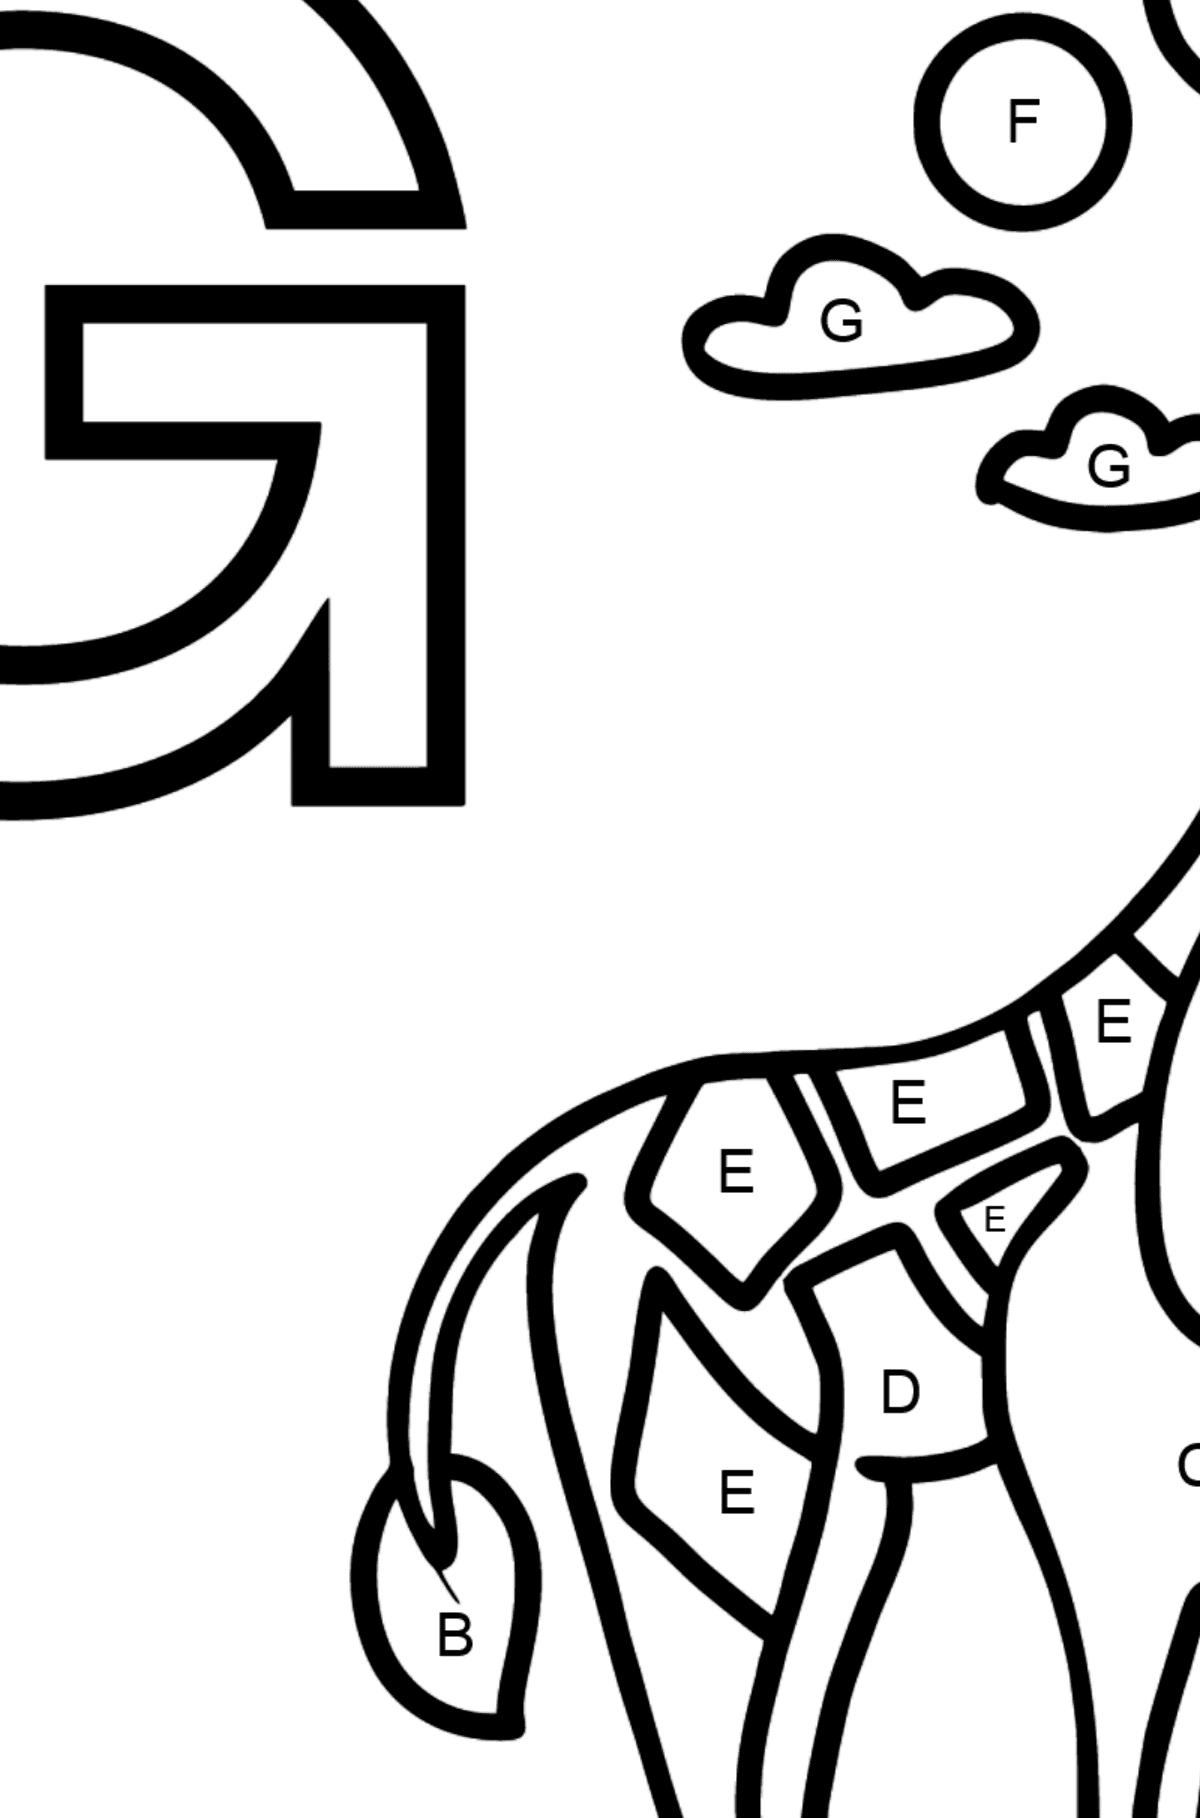 Portuguese Letter G coloring pages - GIRAFA - Coloring by Letters for Kids